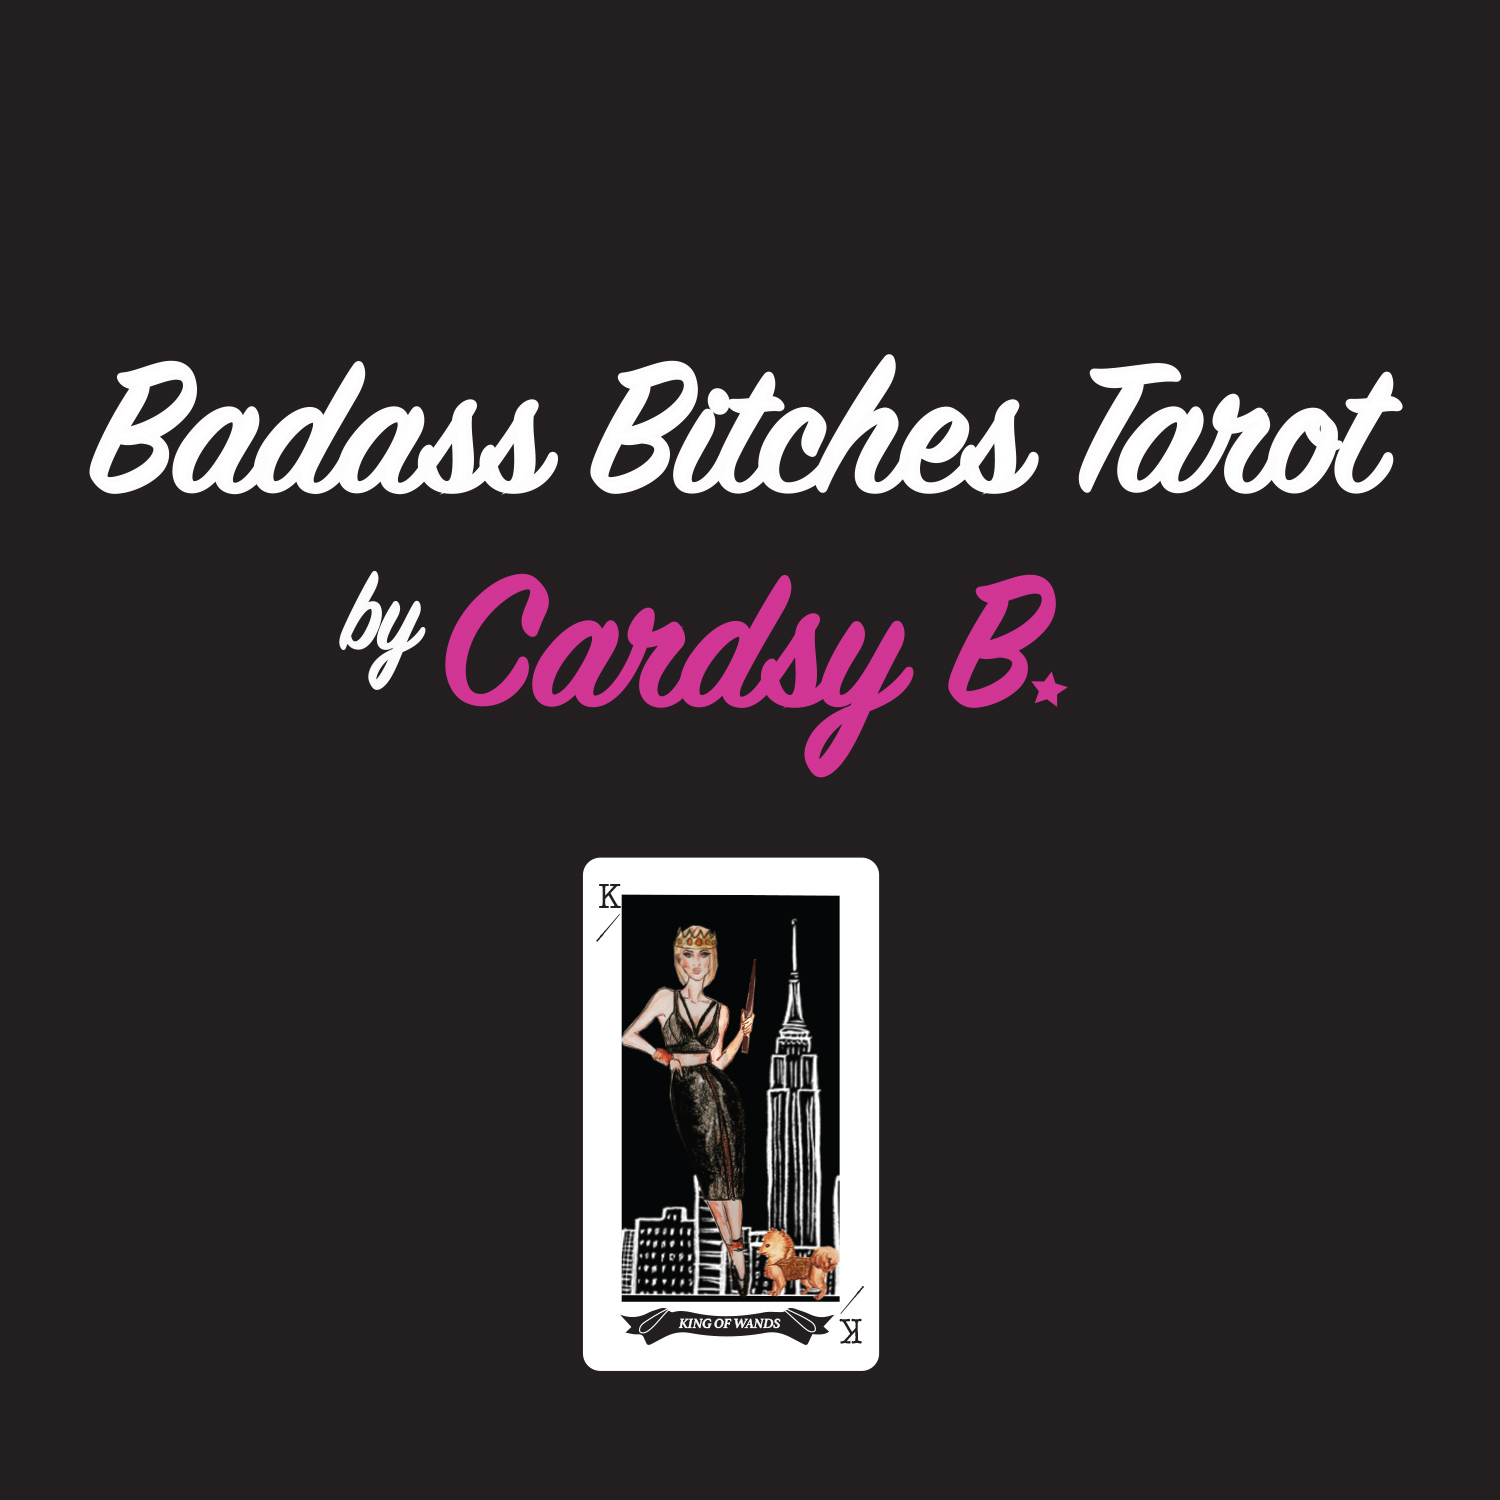 Badass Bitches Tarot by Cardsy B: Episode 5 Aug 19-Aug 25 The One with Joey Healy